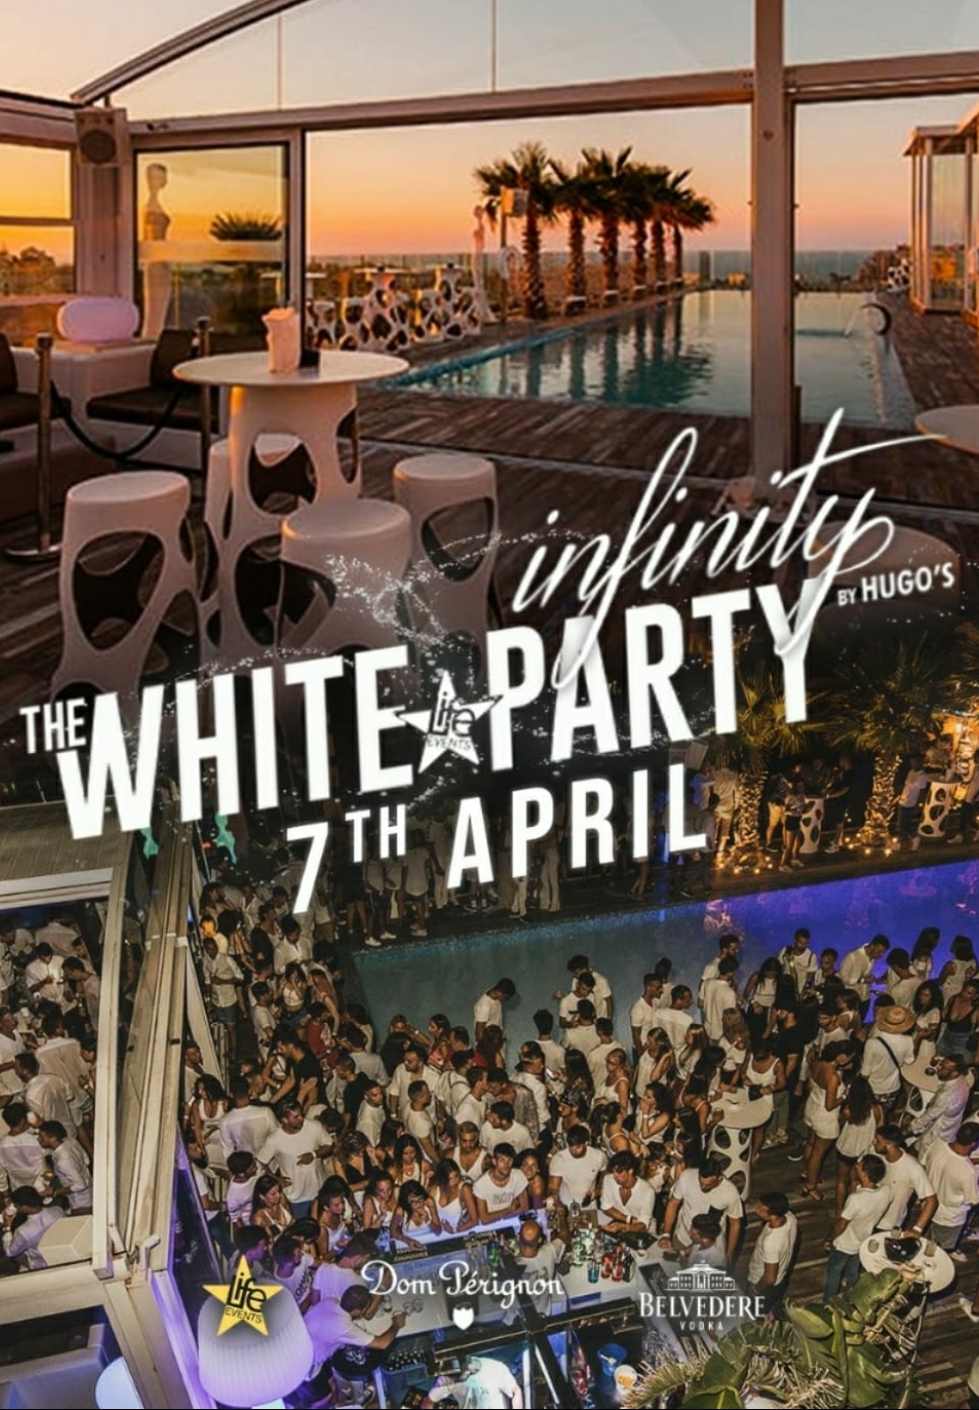 The White Party Infinity by Hugo's poster